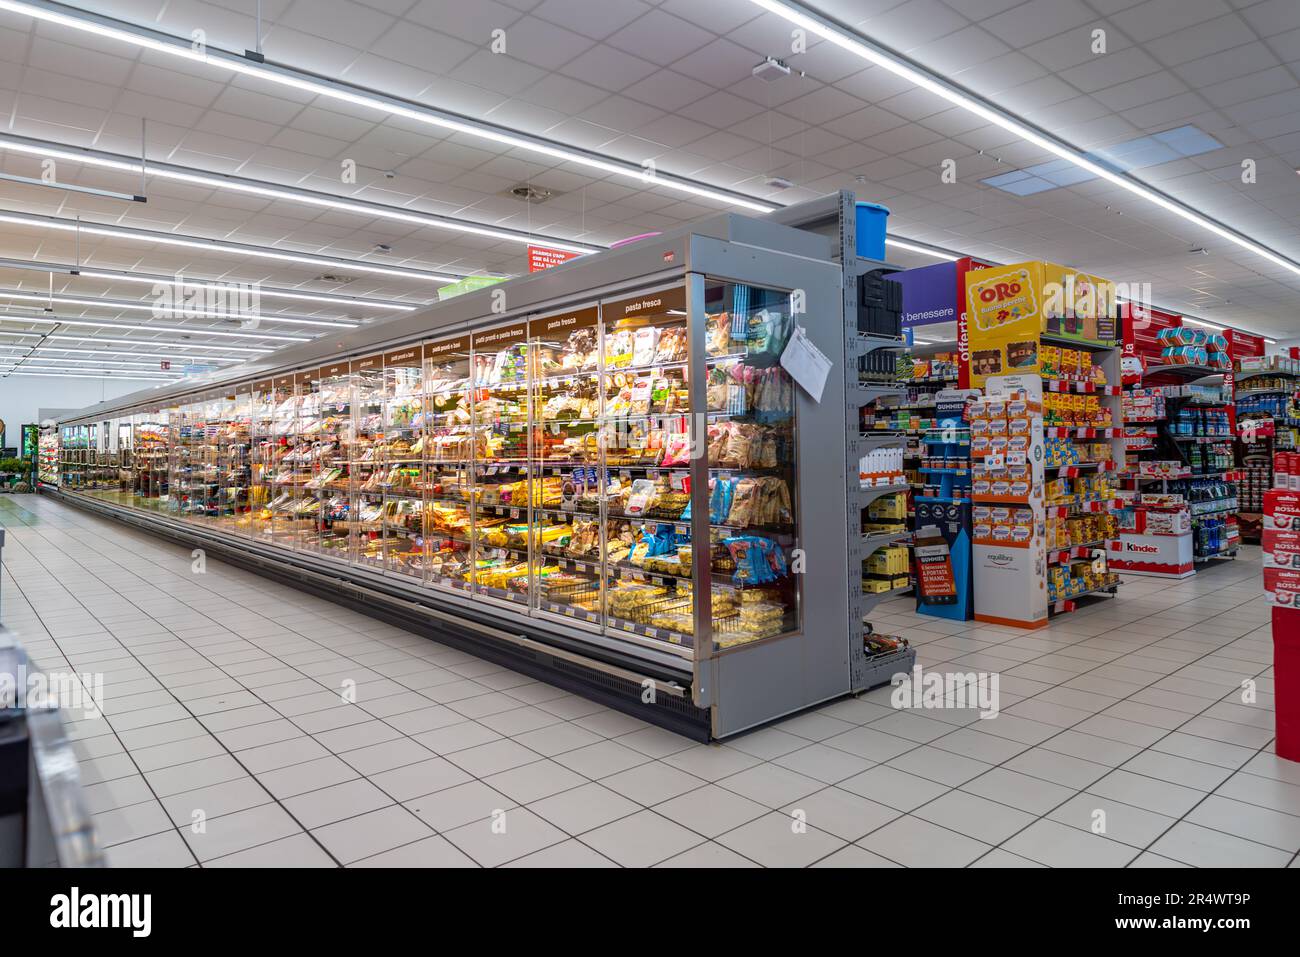 Italy - May 25, 2023: large refrigerated counter with fresh products such as pasta and cheese inside Italian supermarket Stock Photo